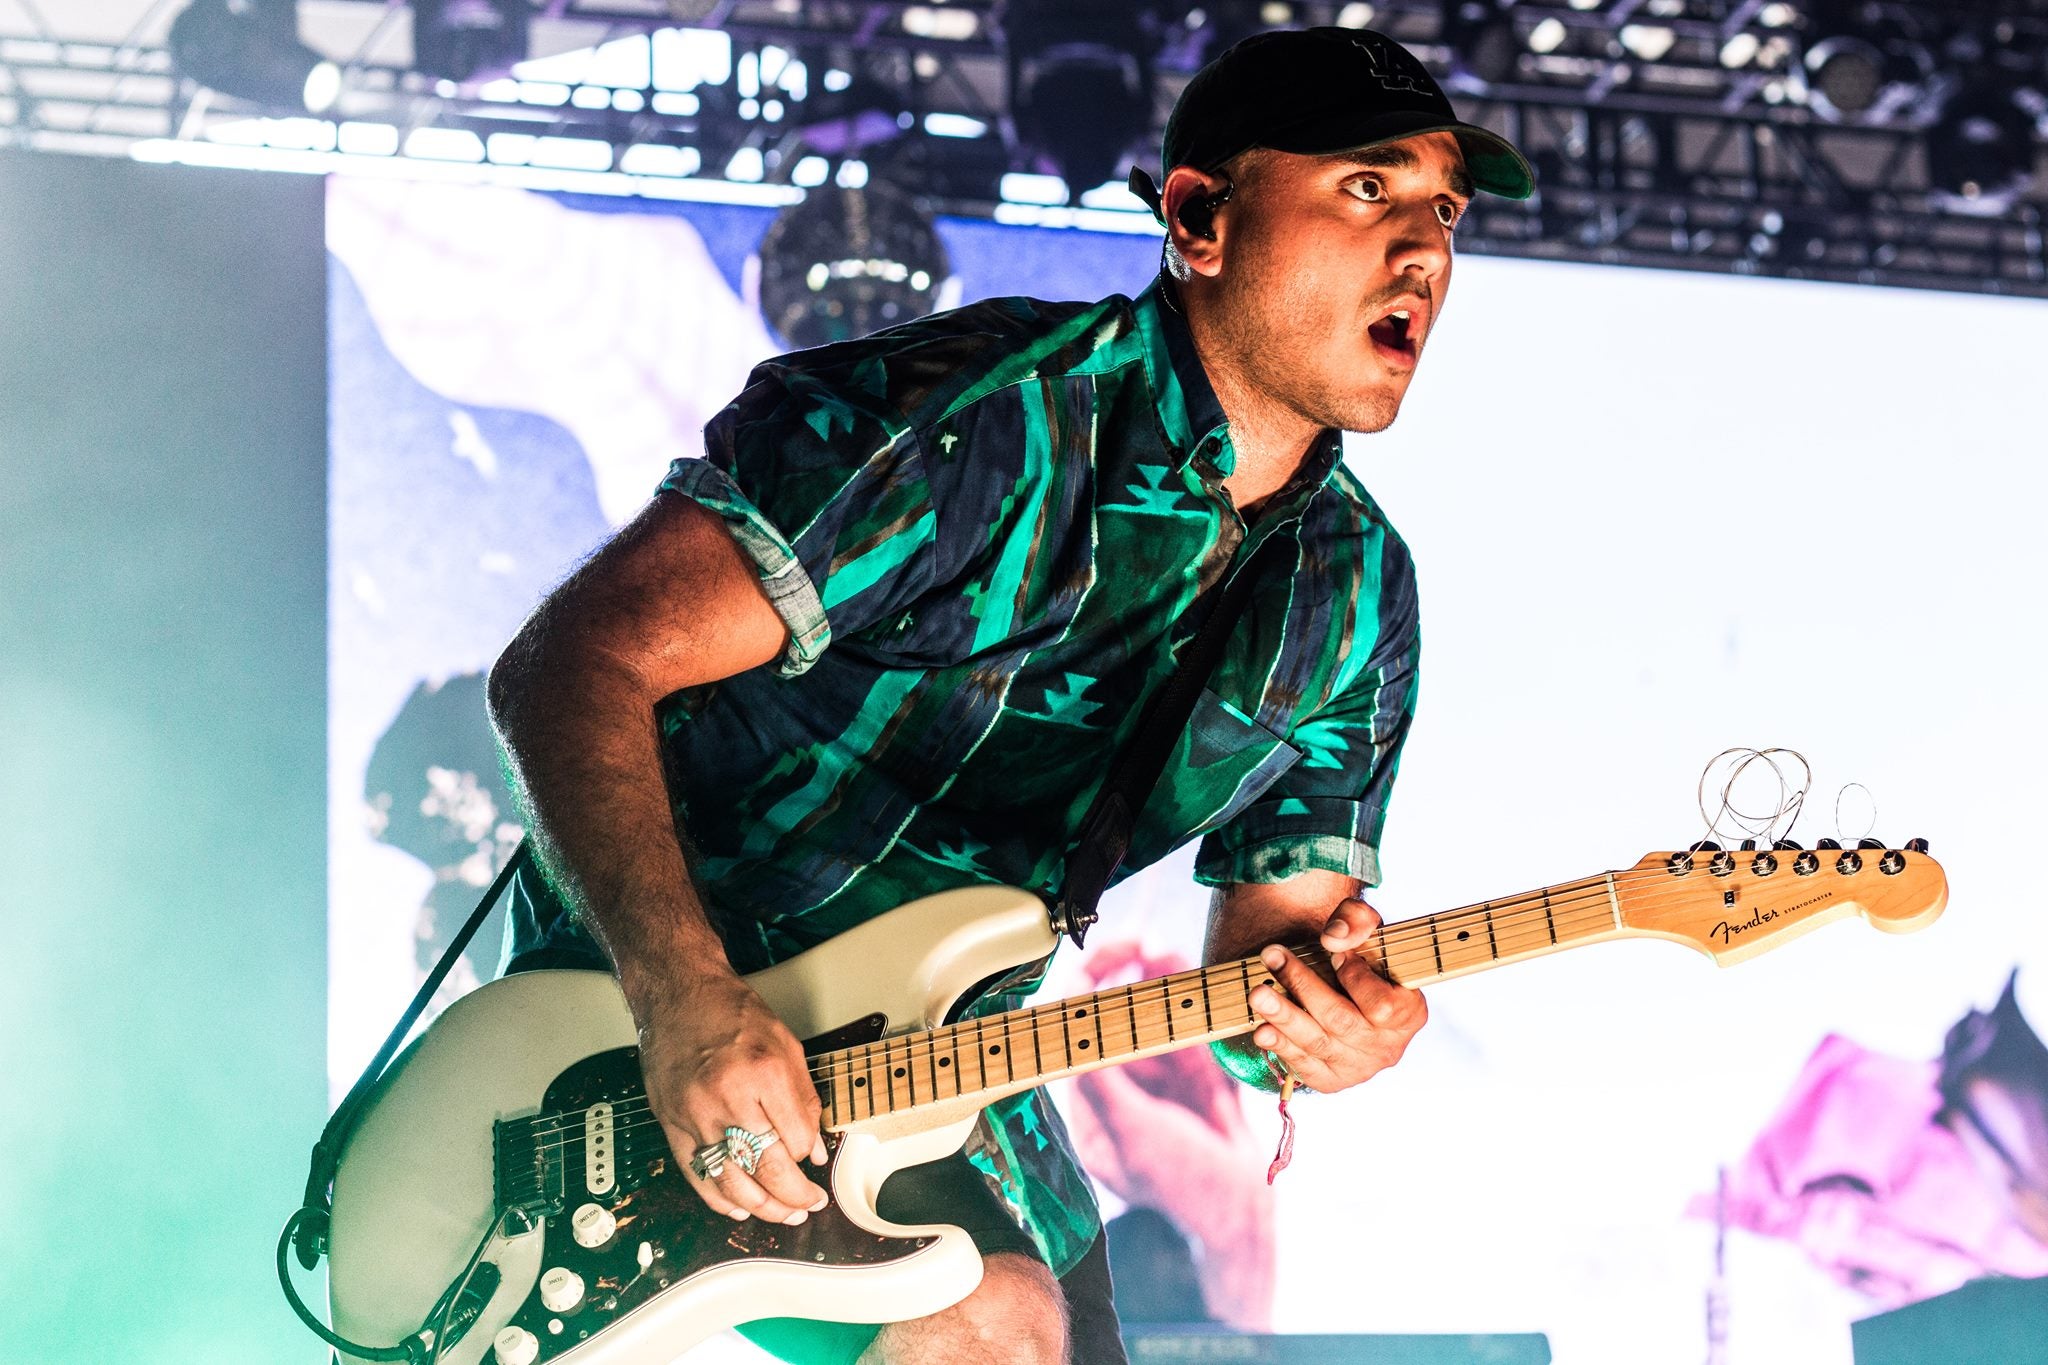 &#13;
Guitarist Jose Serrano of Anderson .Paak &amp; The Free Nationals performs at the inaugural Panorama Music Festival on July 23, 2016 in New York City. Courtesy of Garrett Clare&#13;